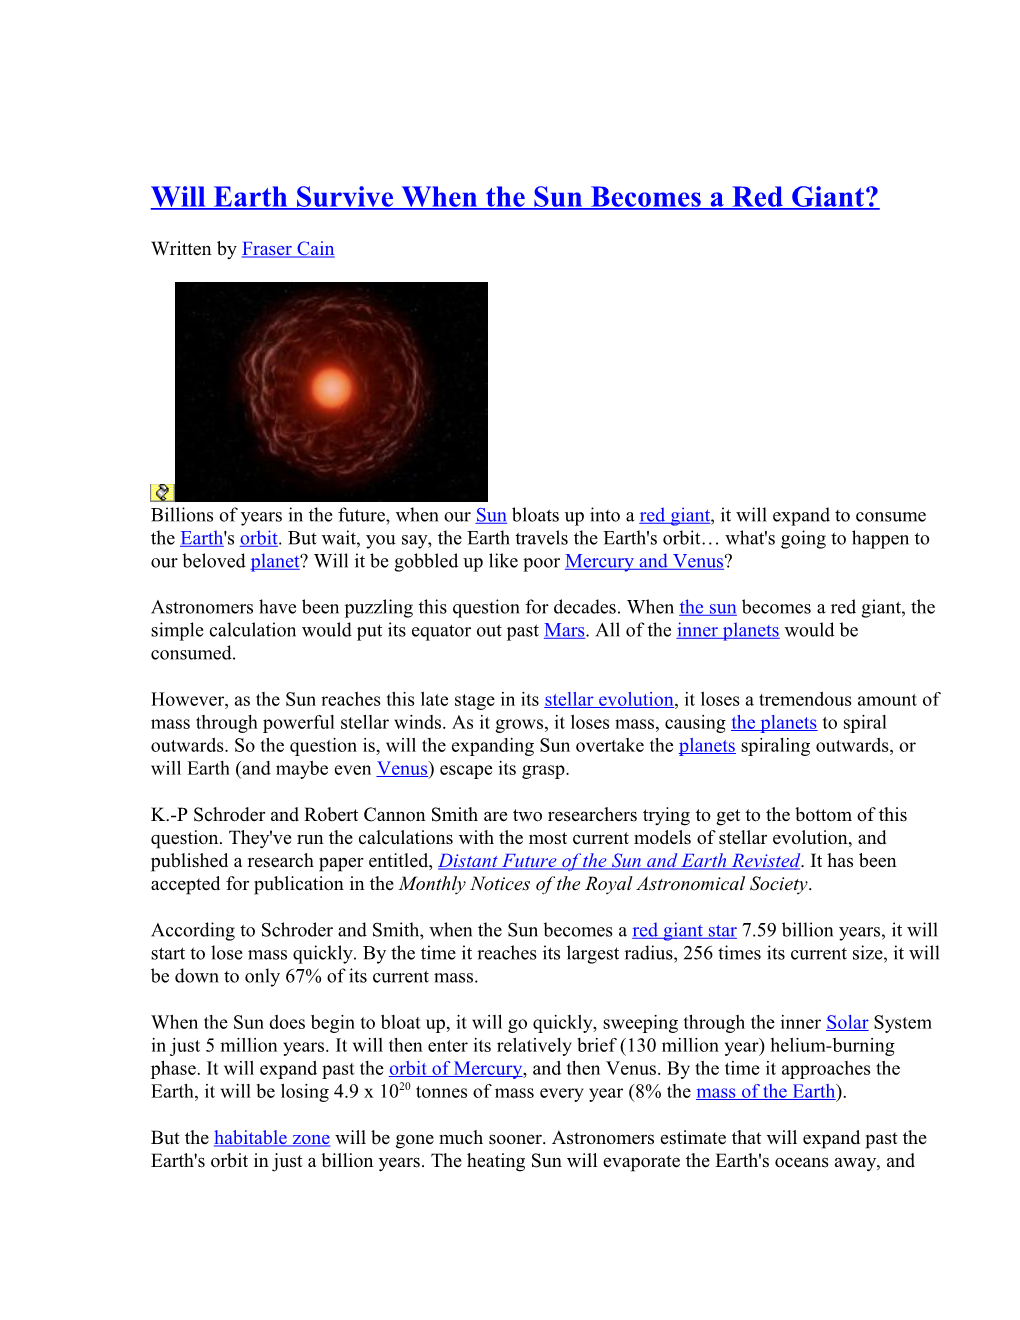 Will Earth Survive When the Sun Becomes a Red Giant